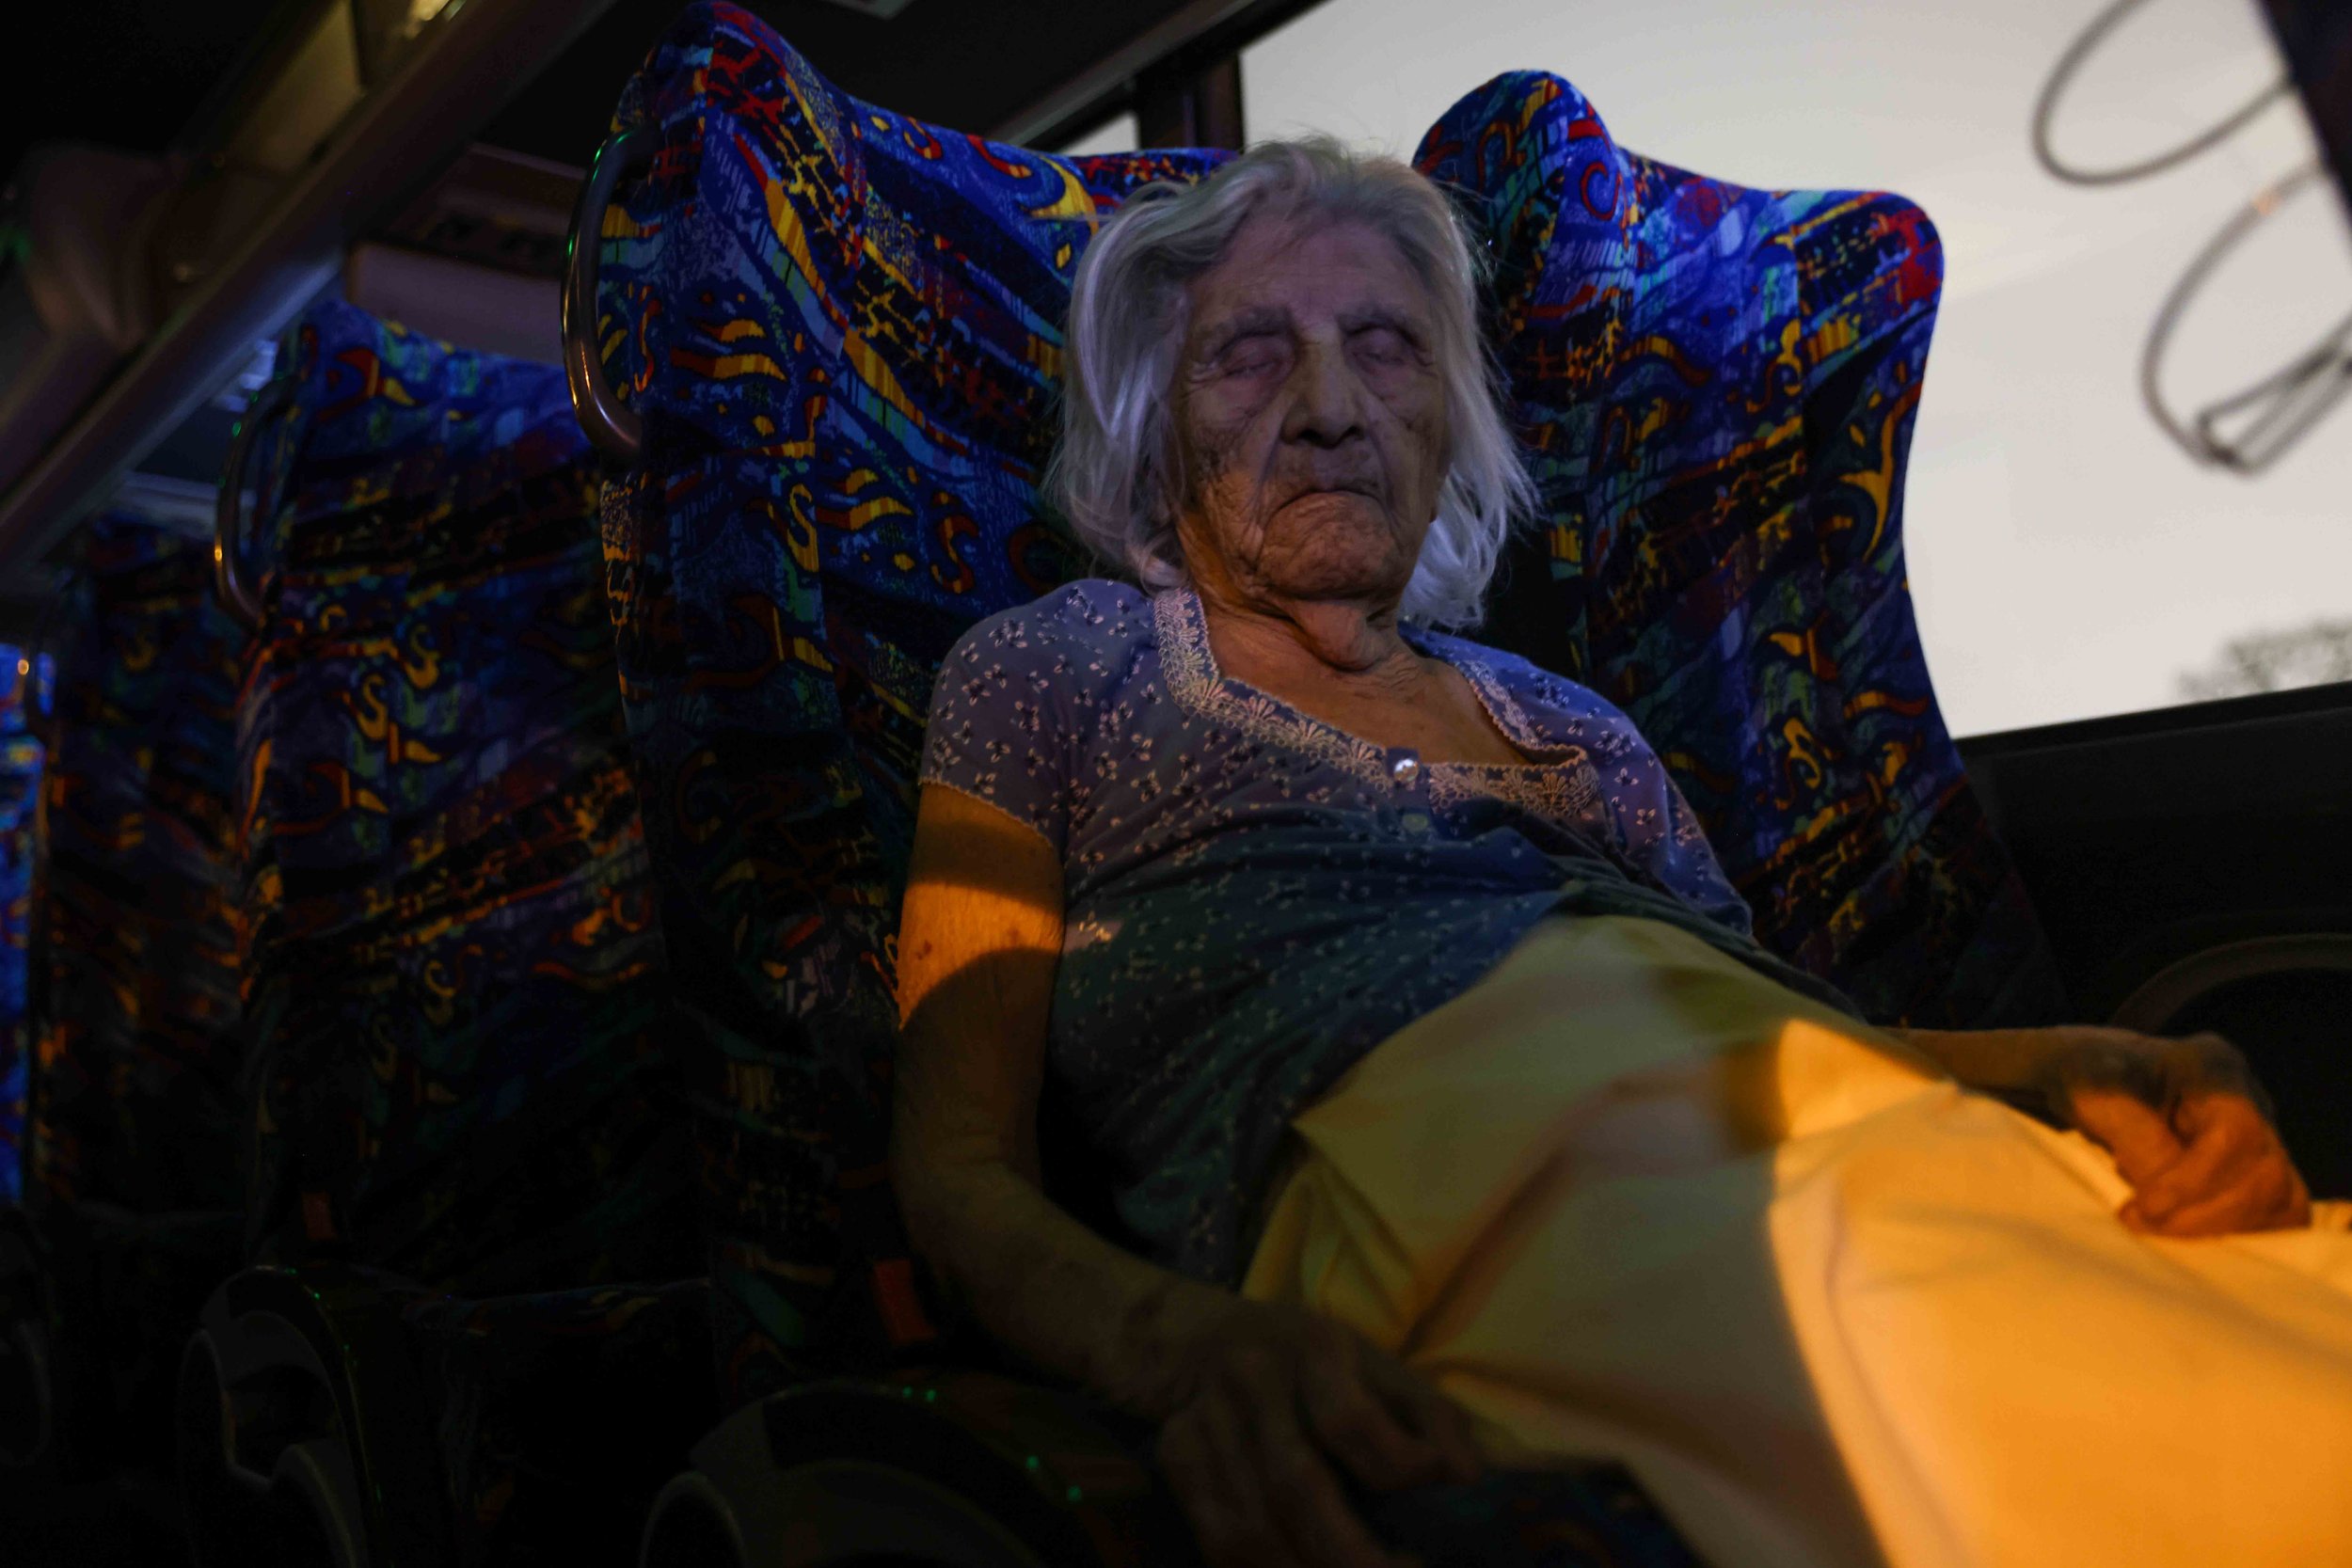  Maria Barajas, who is 100 years old and suffers from severe dementia, sleeps sitting on the bus seat that serves as a warming center located in Pleasant Oaks Recreation Center in Dallas on Wednesday, February 18, 2021. On early Monday, the house she